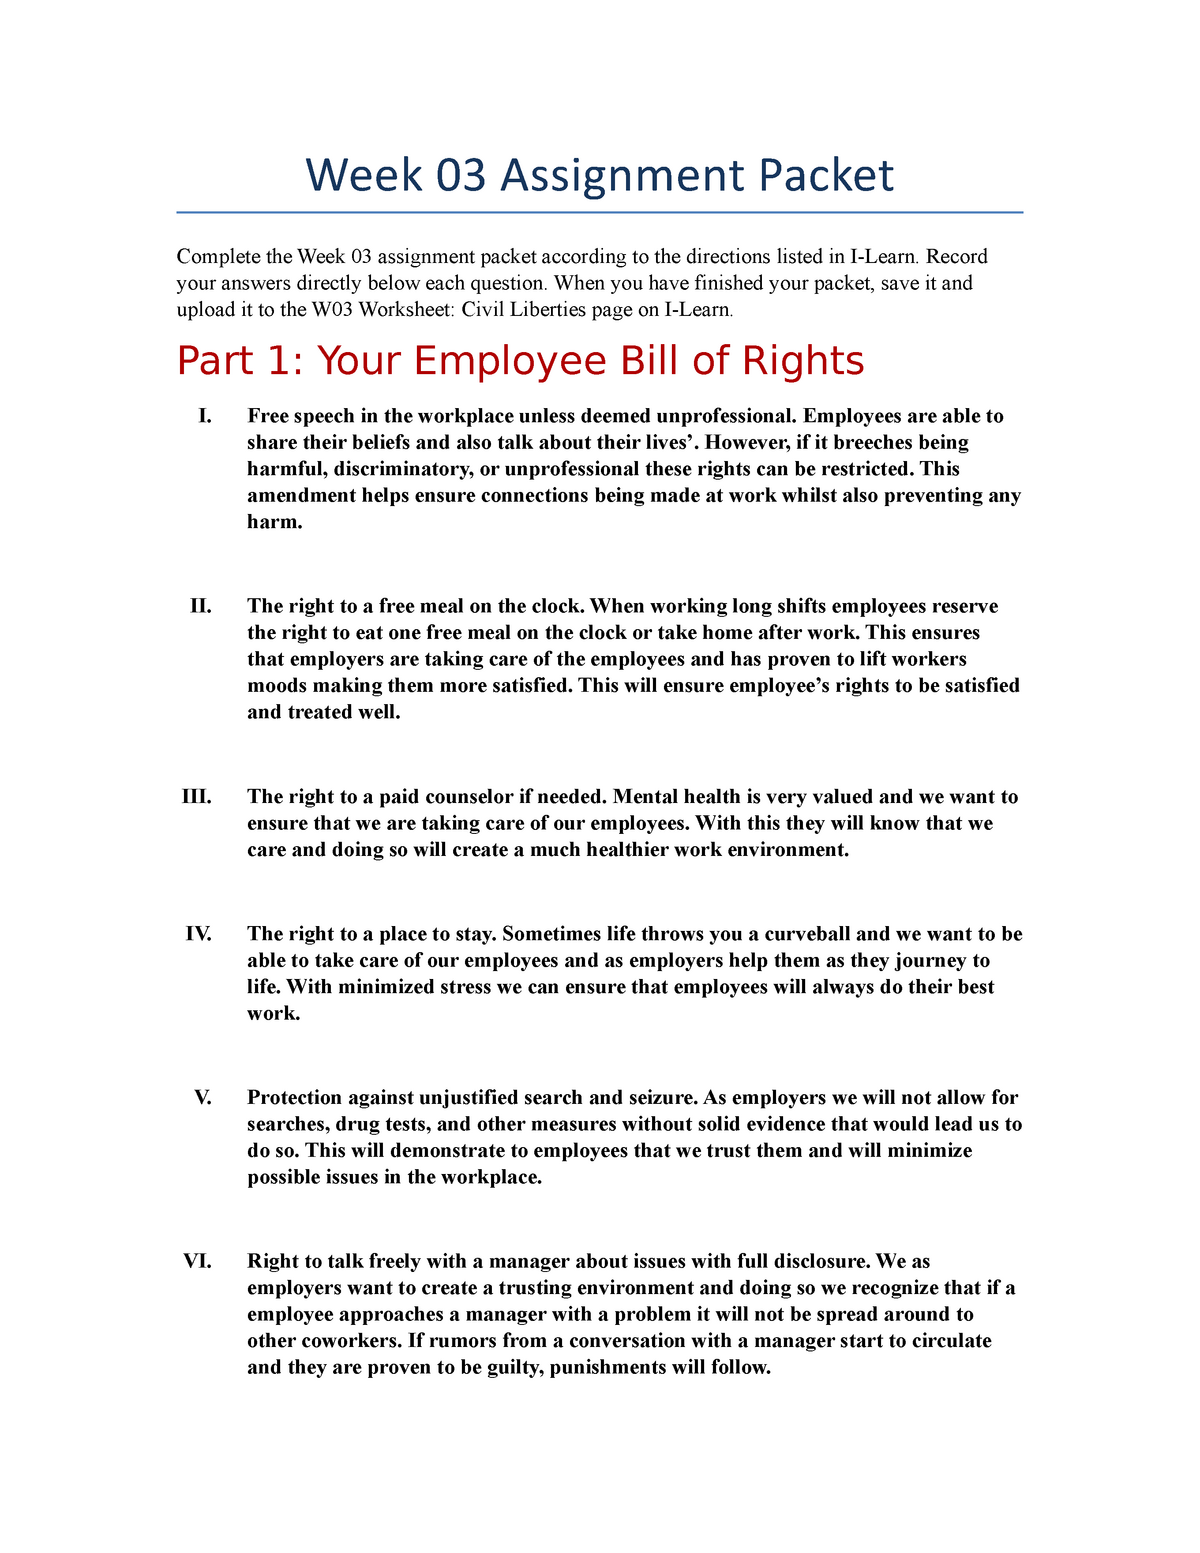 Polsc 22 document week22Assignment Packet - American Government Pertaining To I Have Rights Worksheet Answers